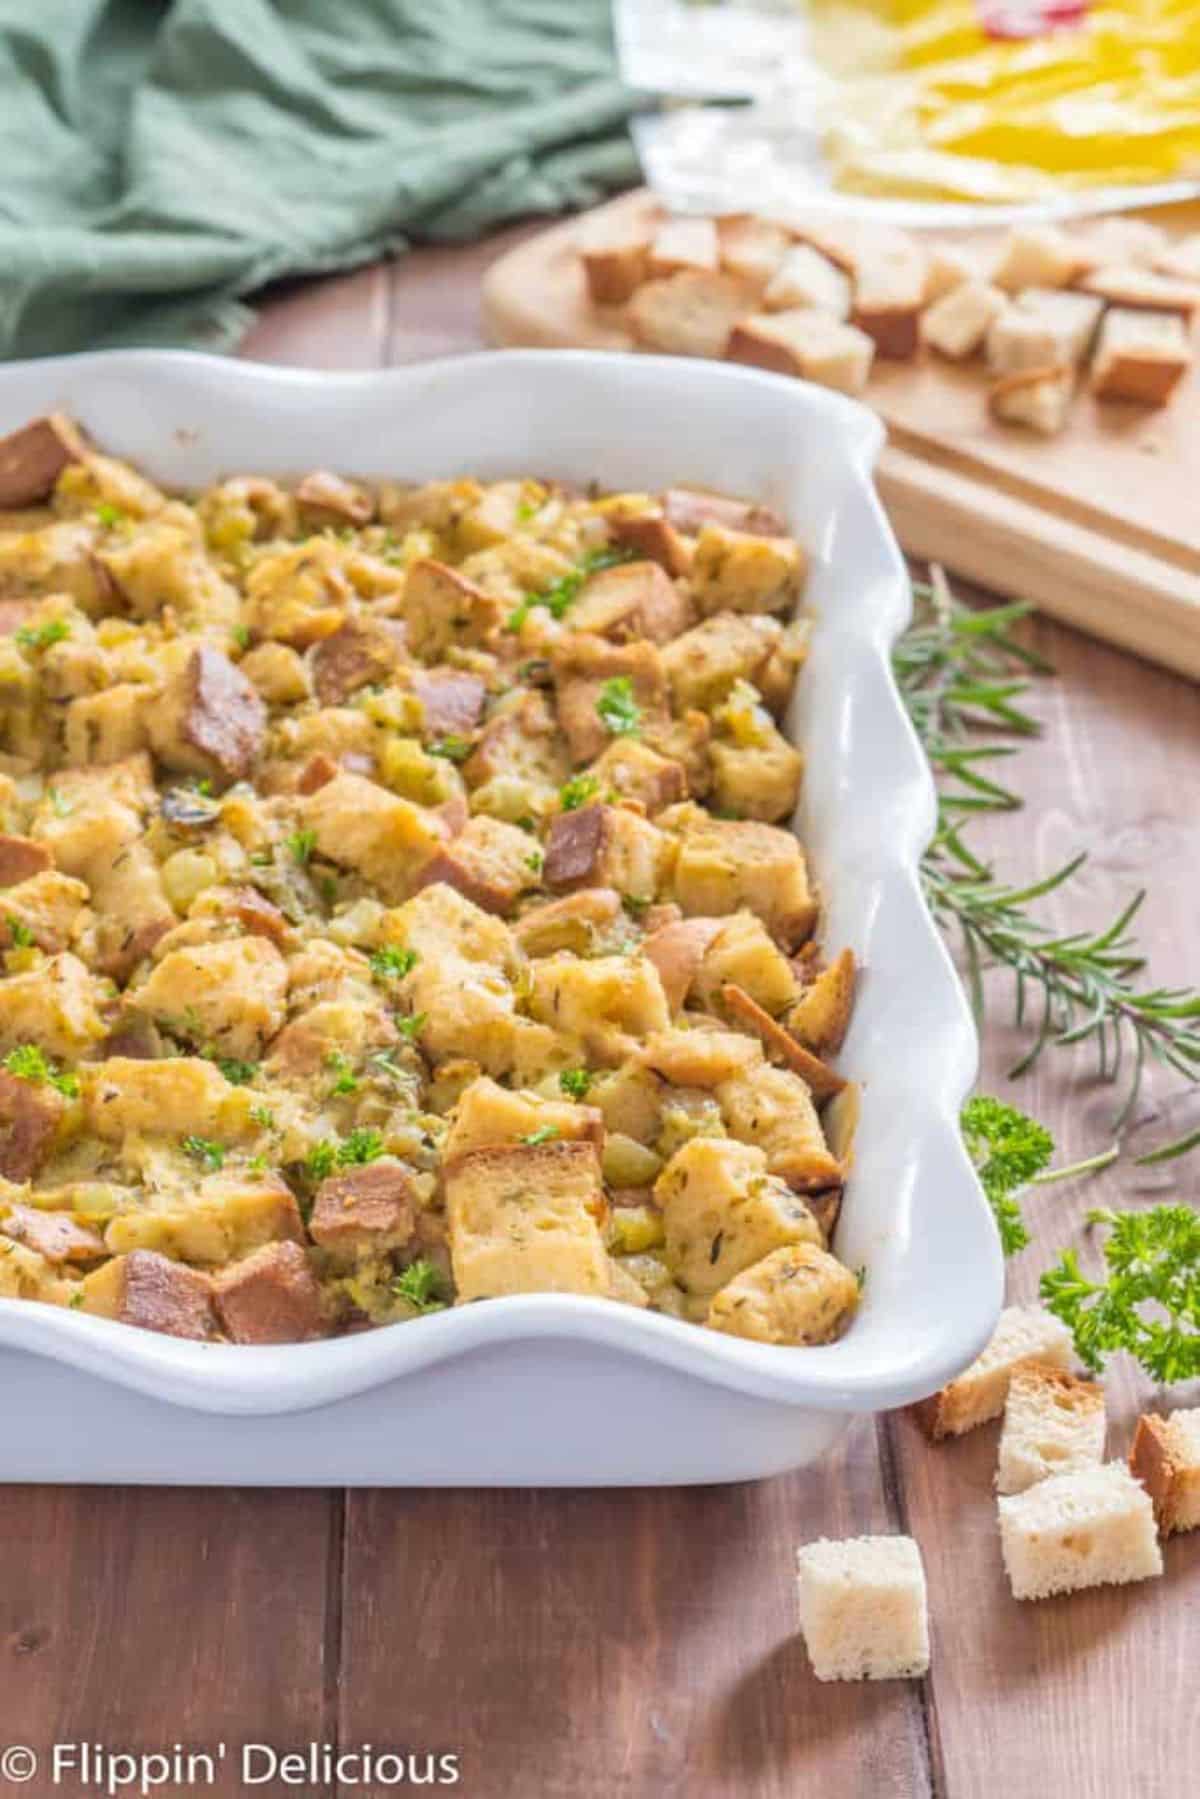 Flavorful Gluten-Free Stuffing with Green Chile in a white casserole.